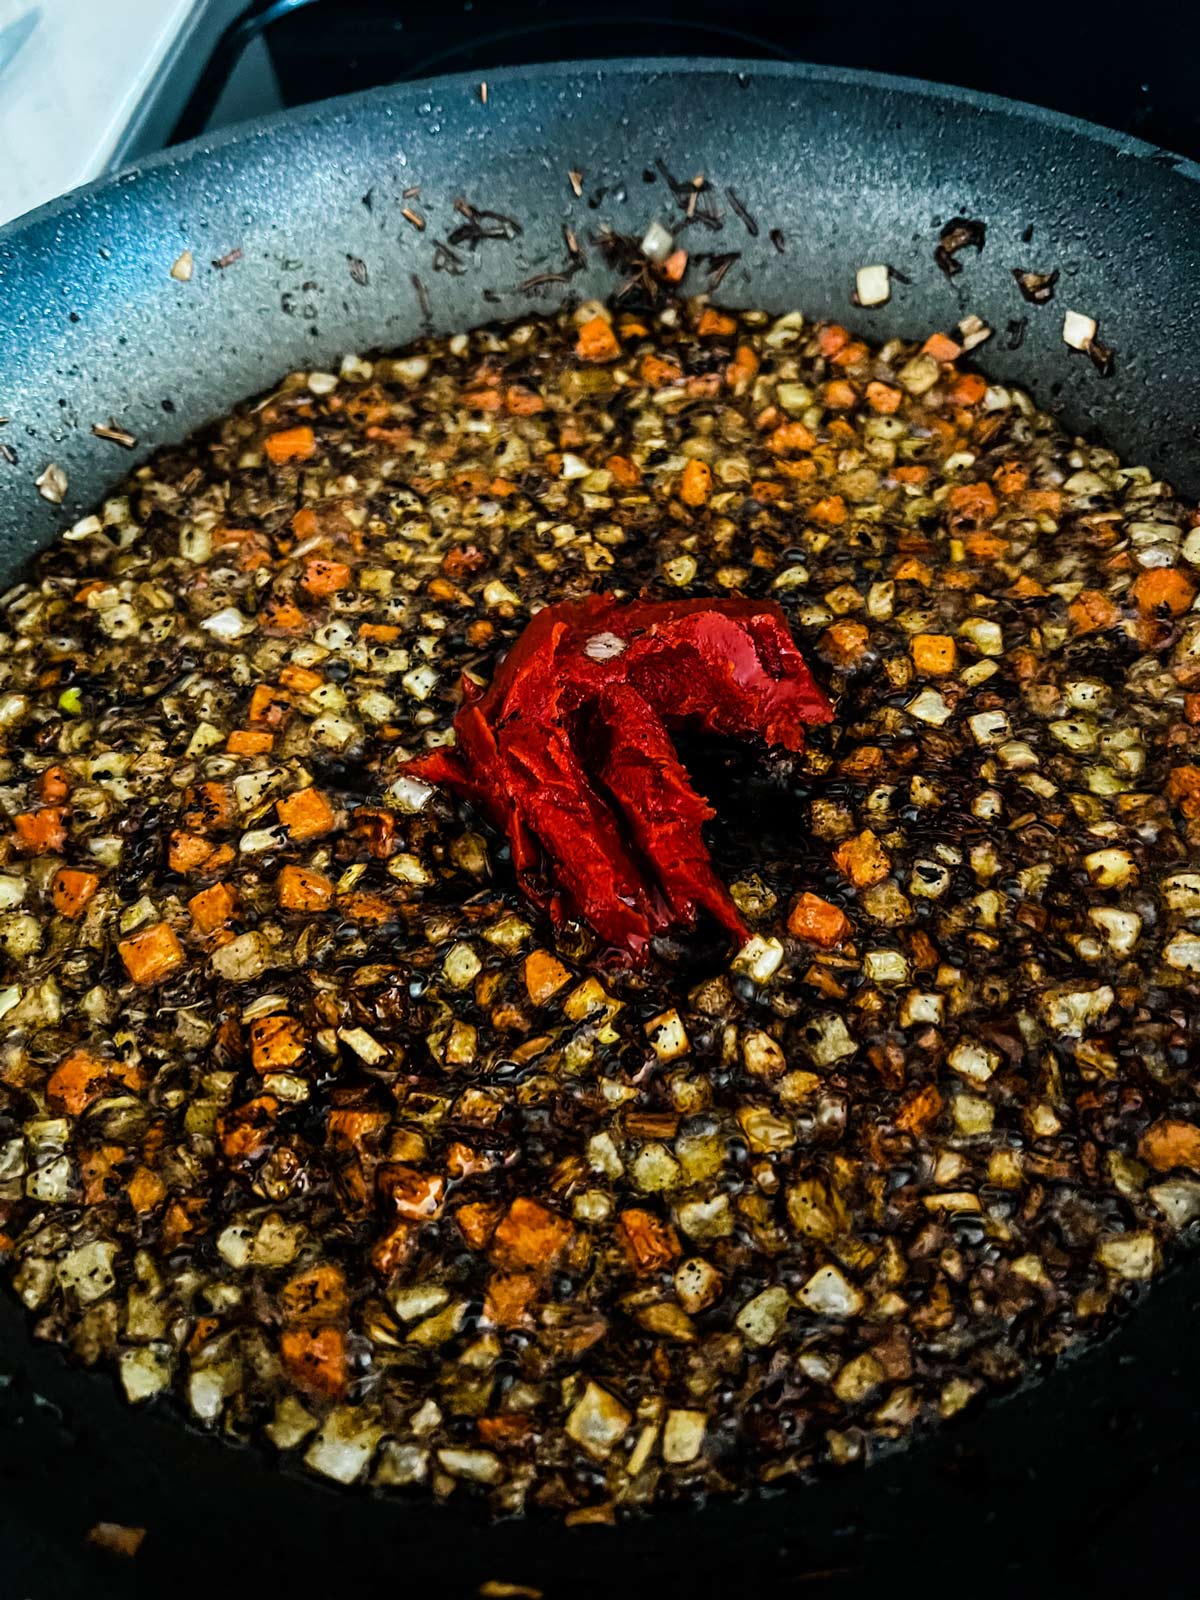 Tomato paste added to a skillet of sautéed vegetables.